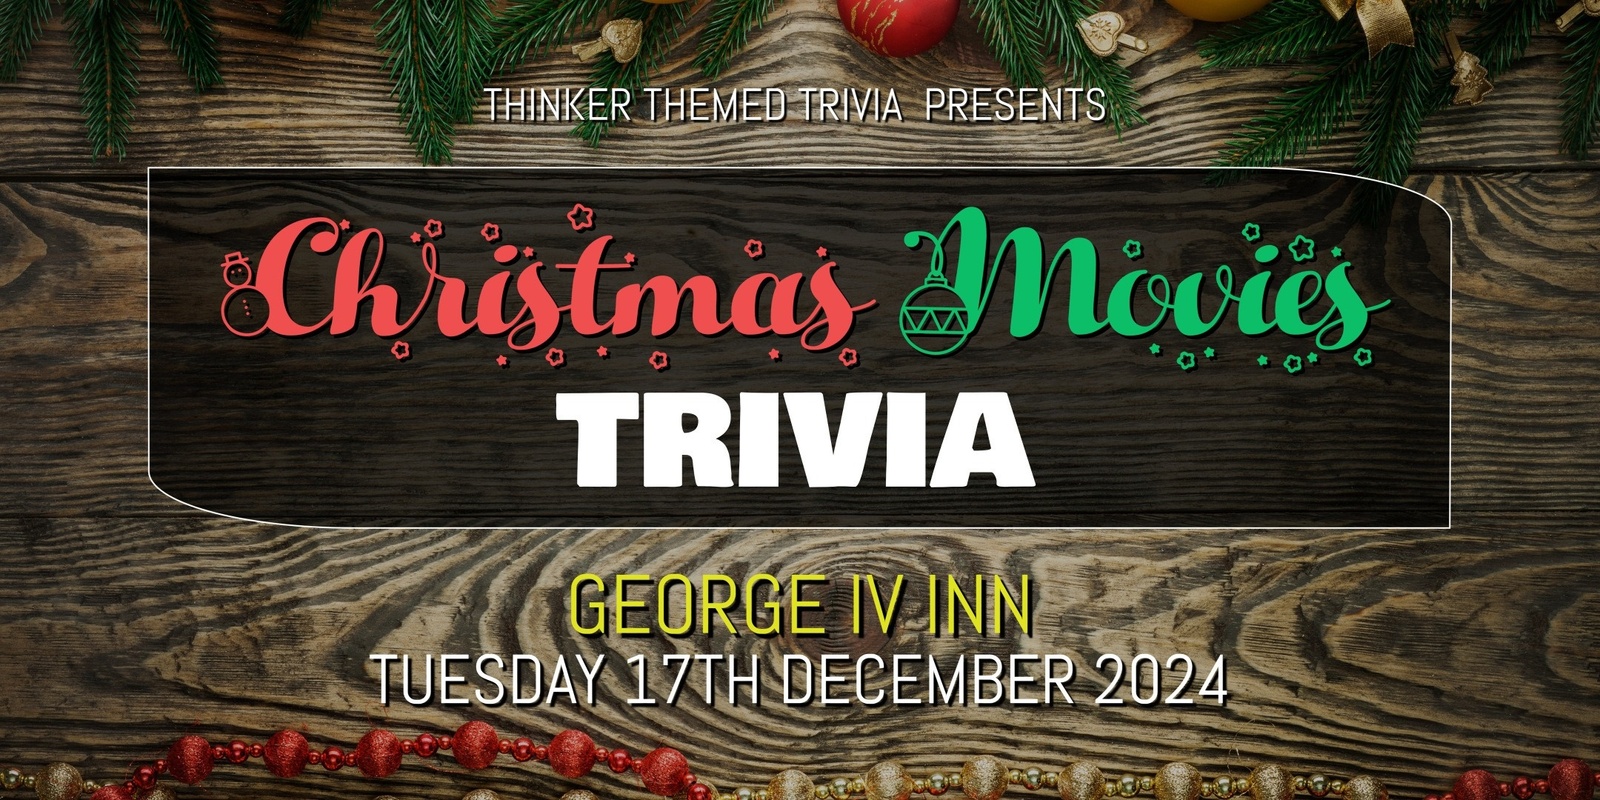 Banner image for Christmas Movies Trivia - George IV Inn